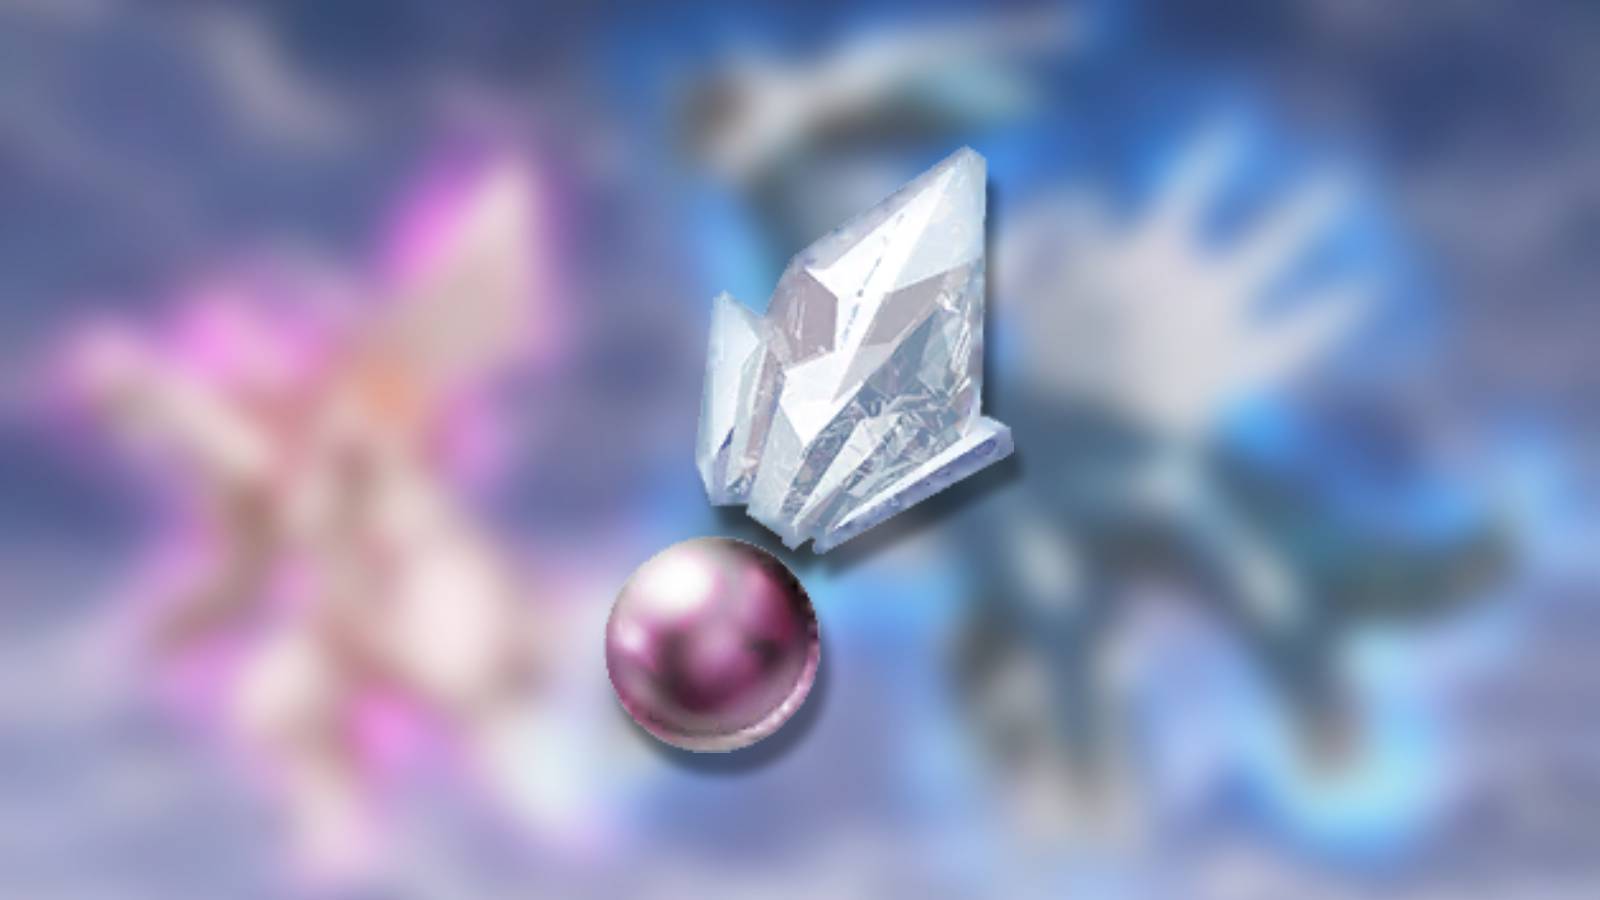 the Pokemon Go Sinnoh Stone is visible against a blurred background